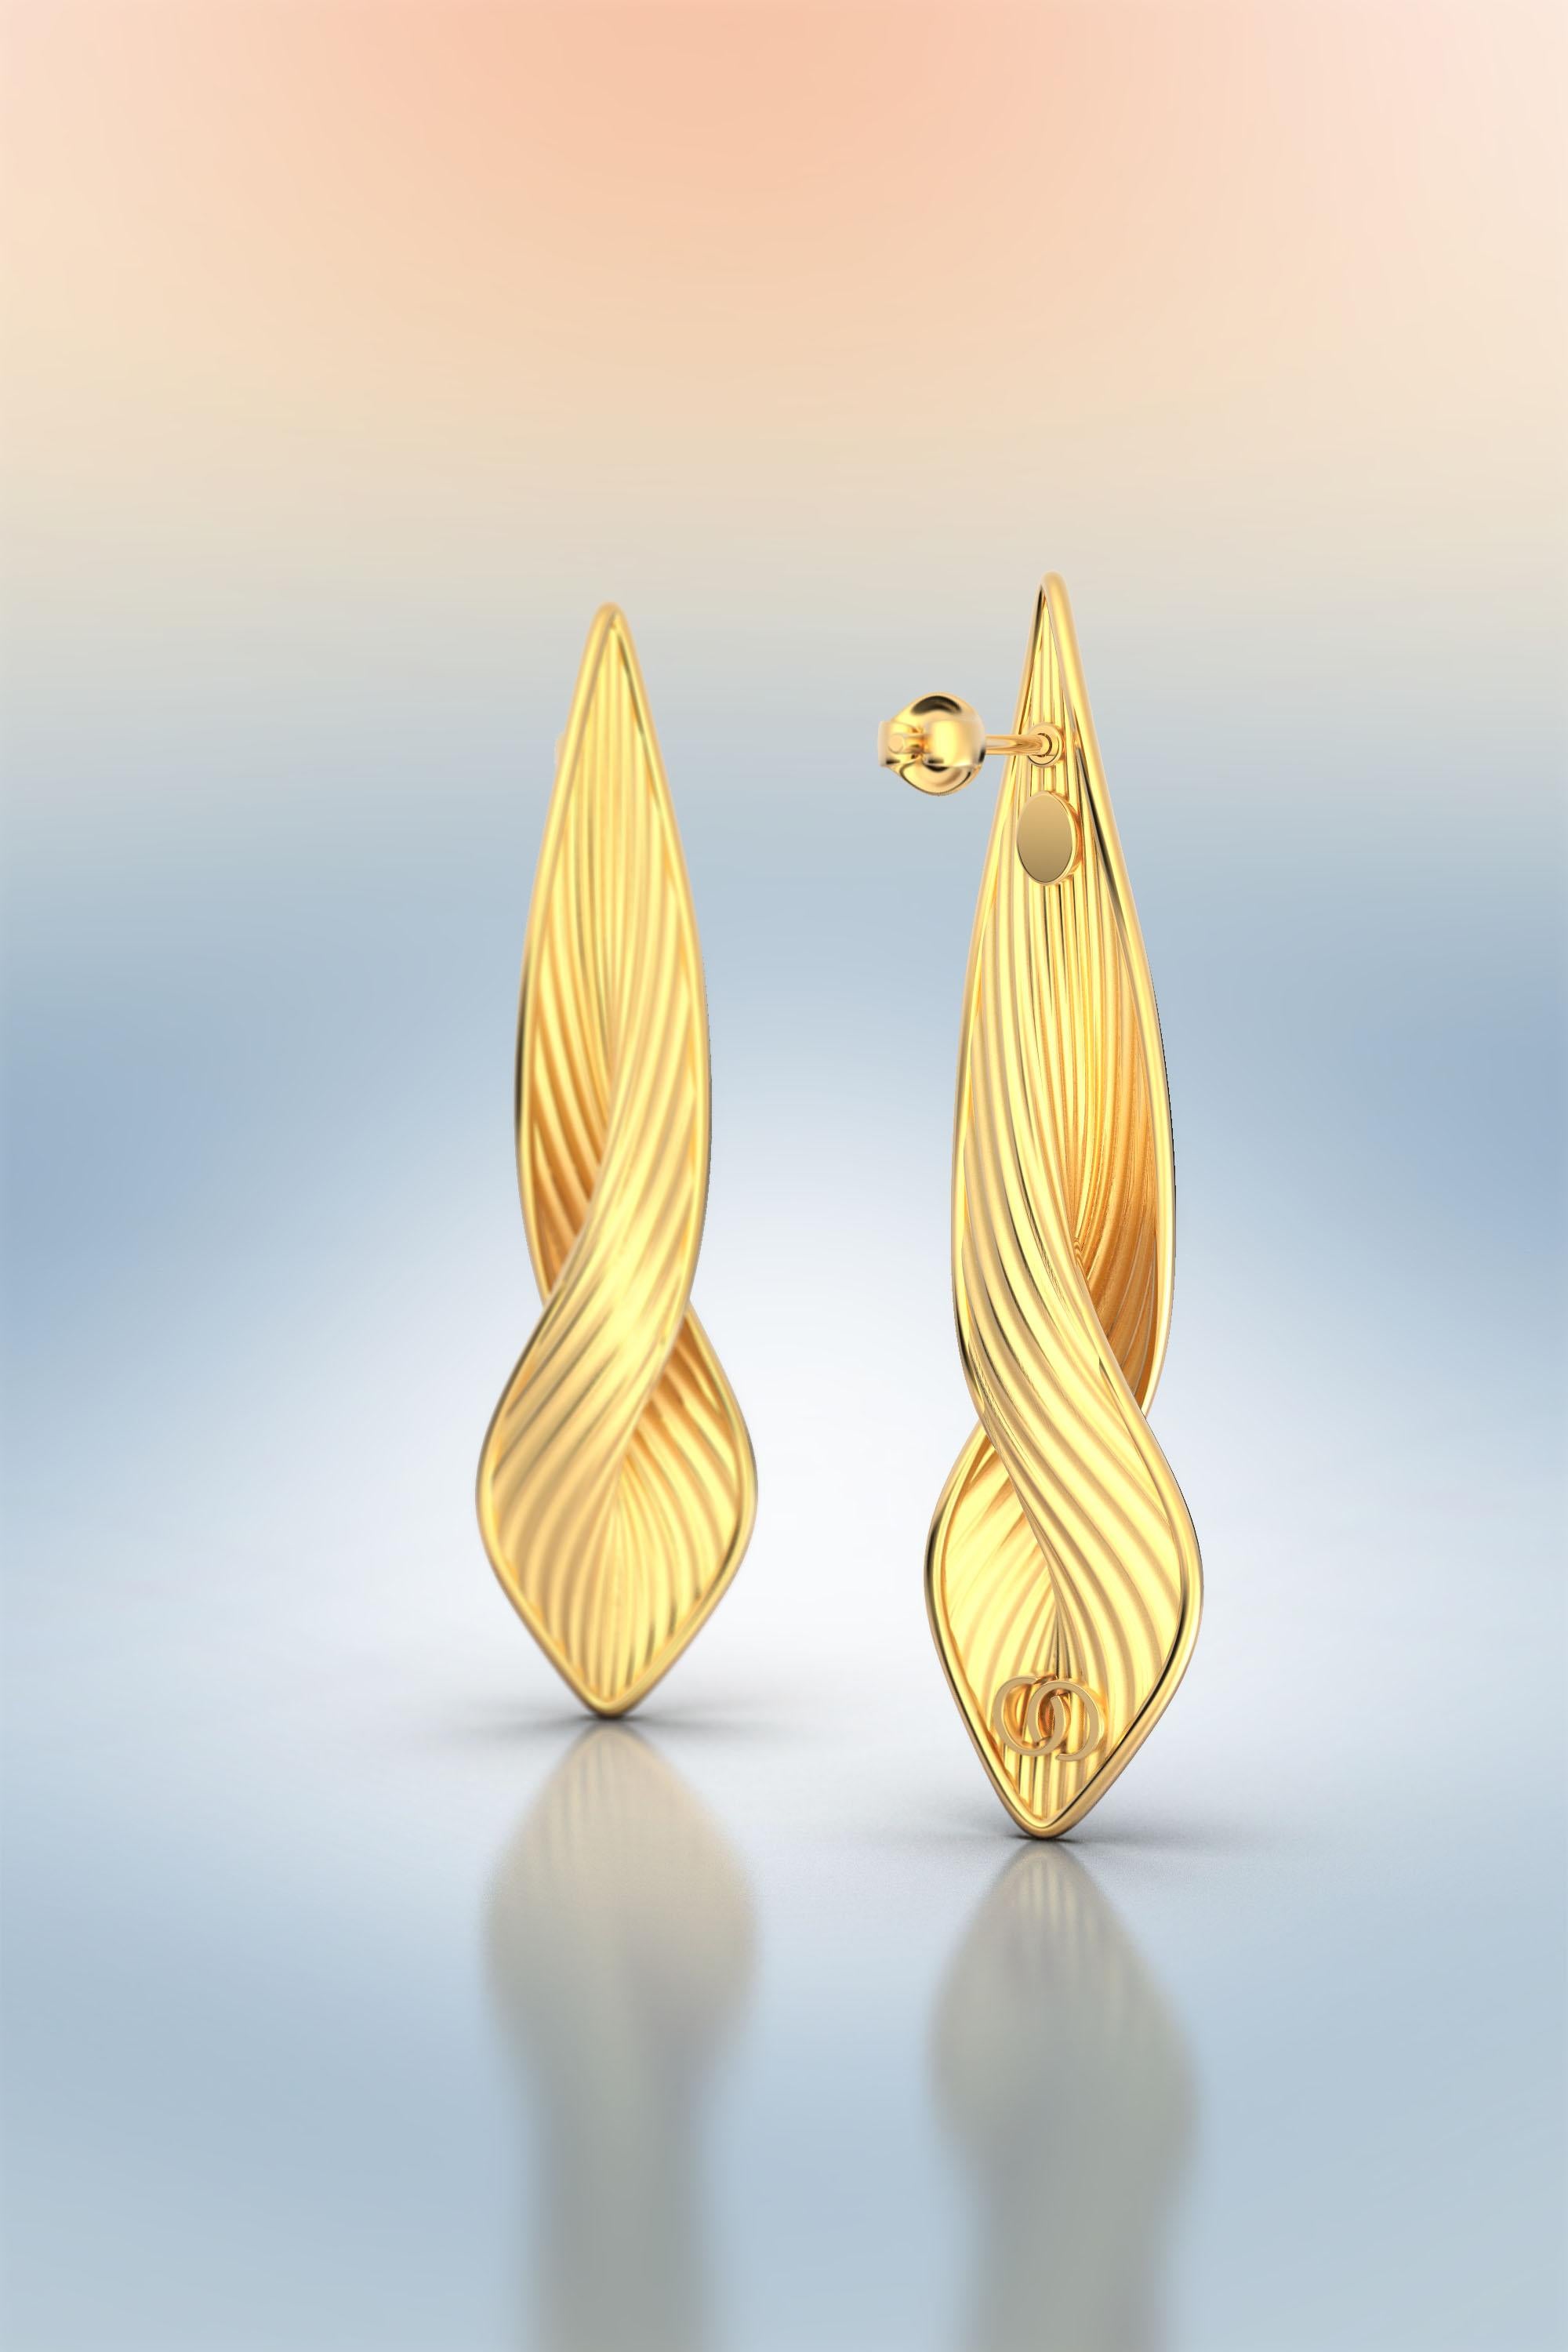 Long Twisted Earrings in 18k Solid Gold Italian Fine Jewelry Made in, Italy For Sale 1